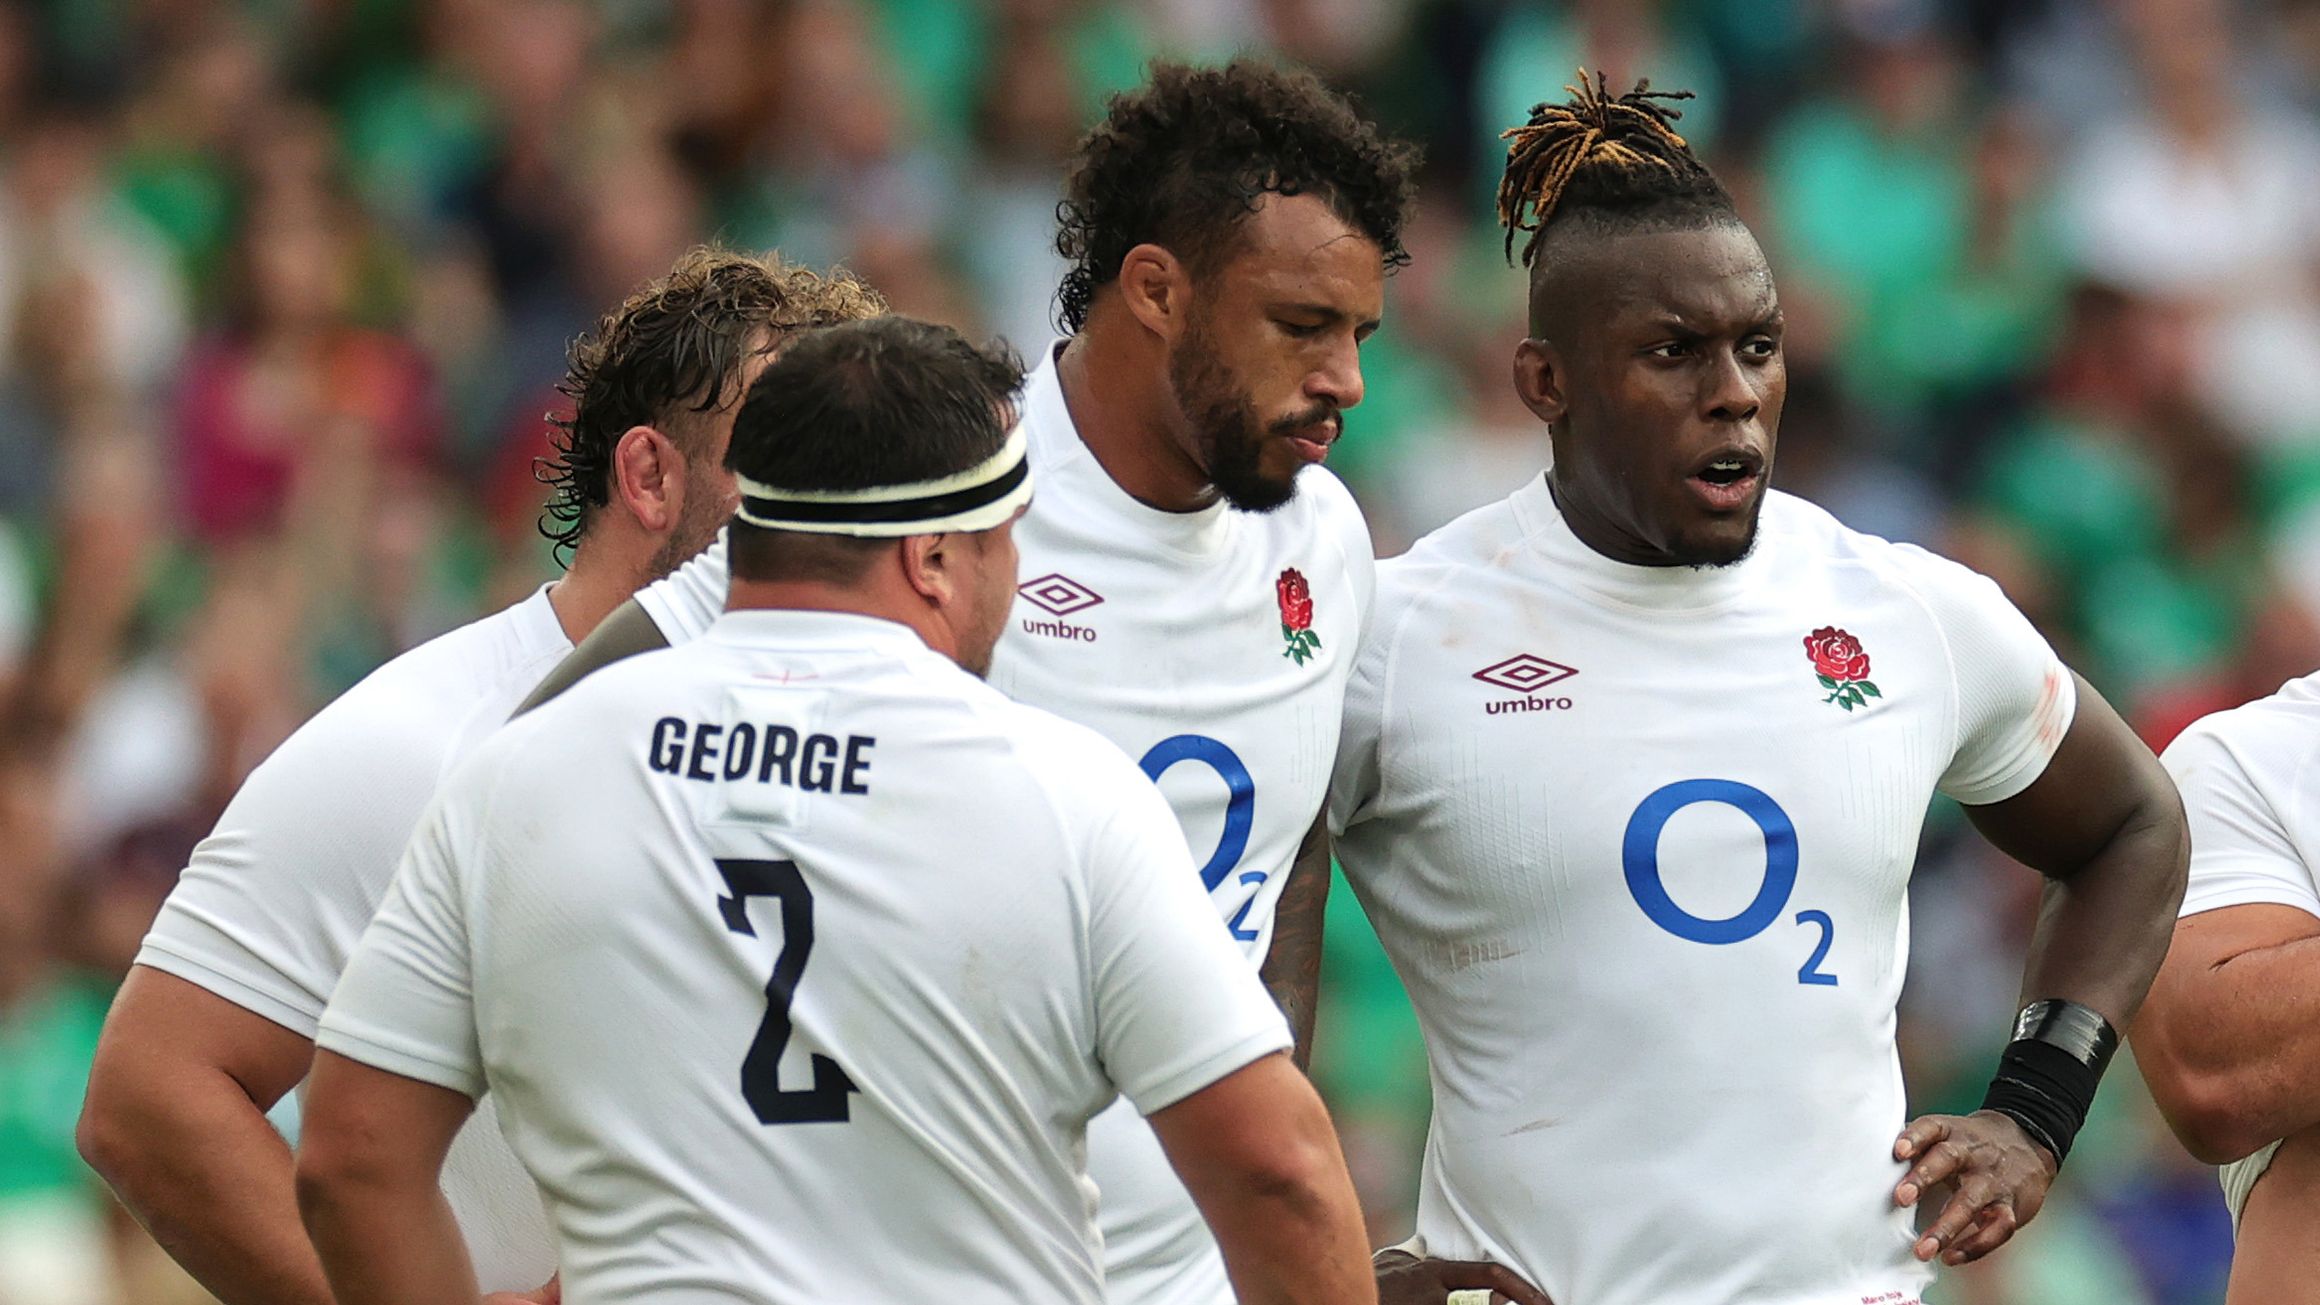 England look dejected after their defeat during the Summer International match against Ireland.